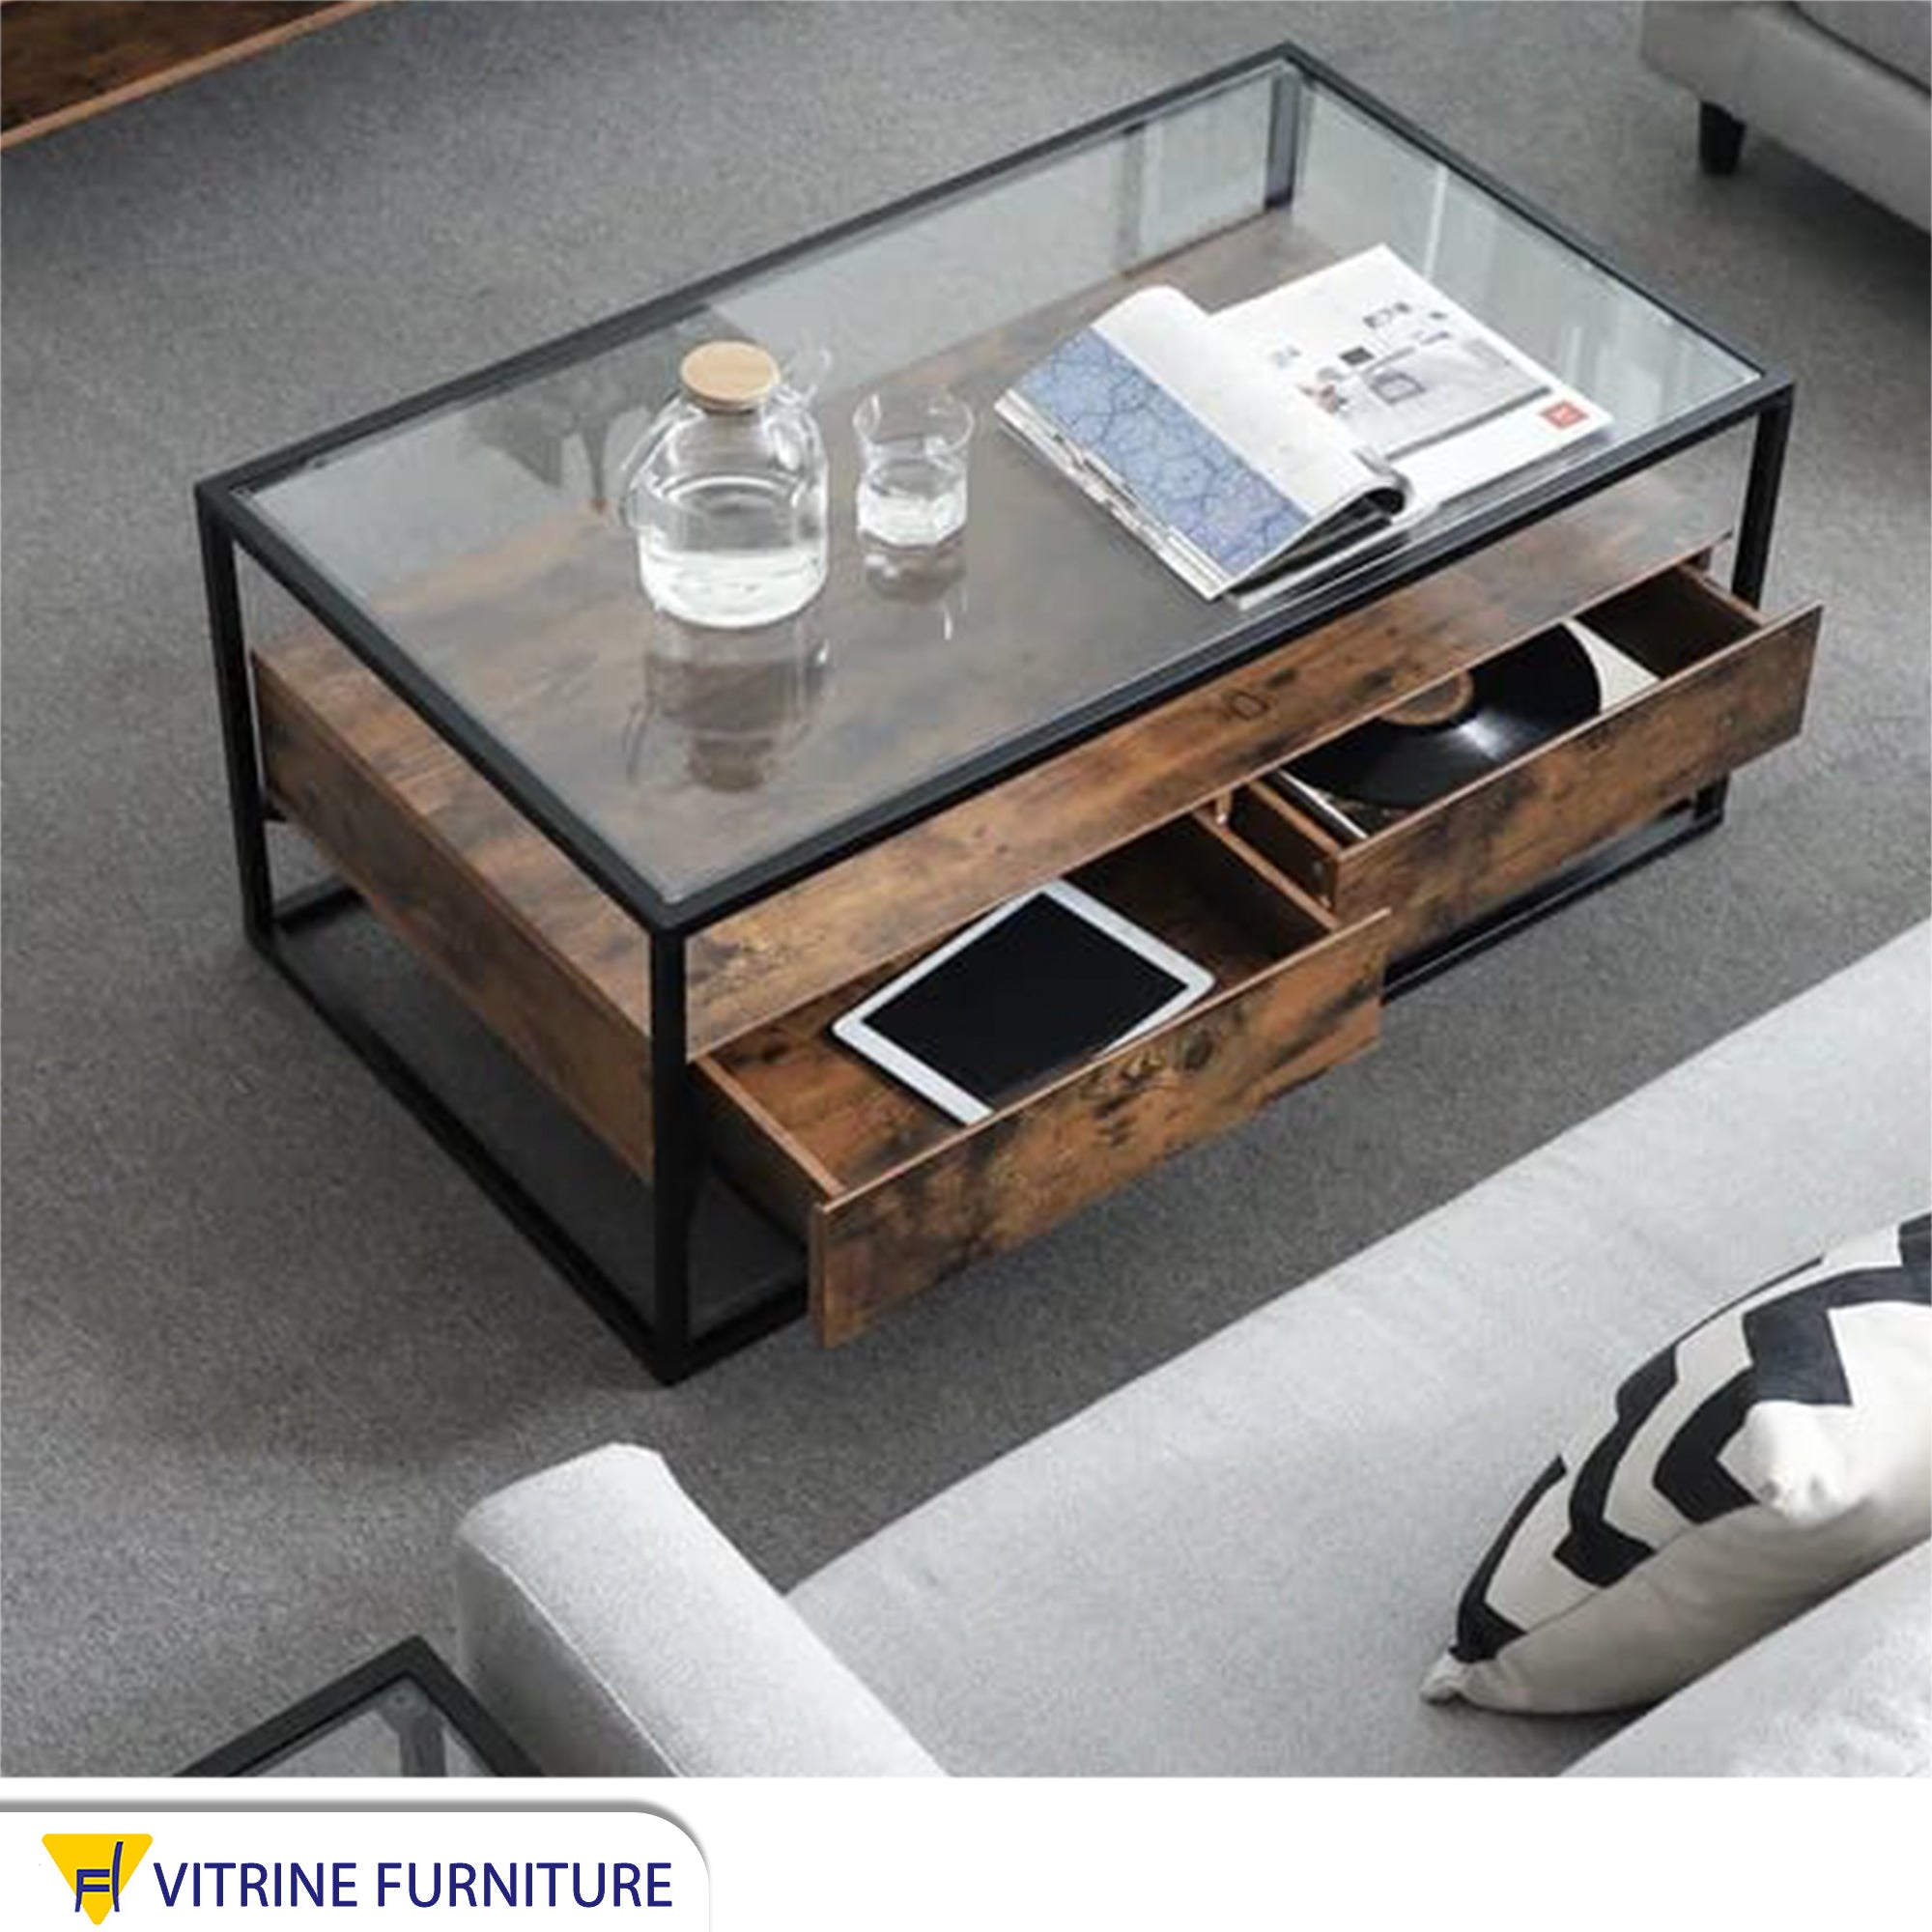 Black steel table with wooden drawers